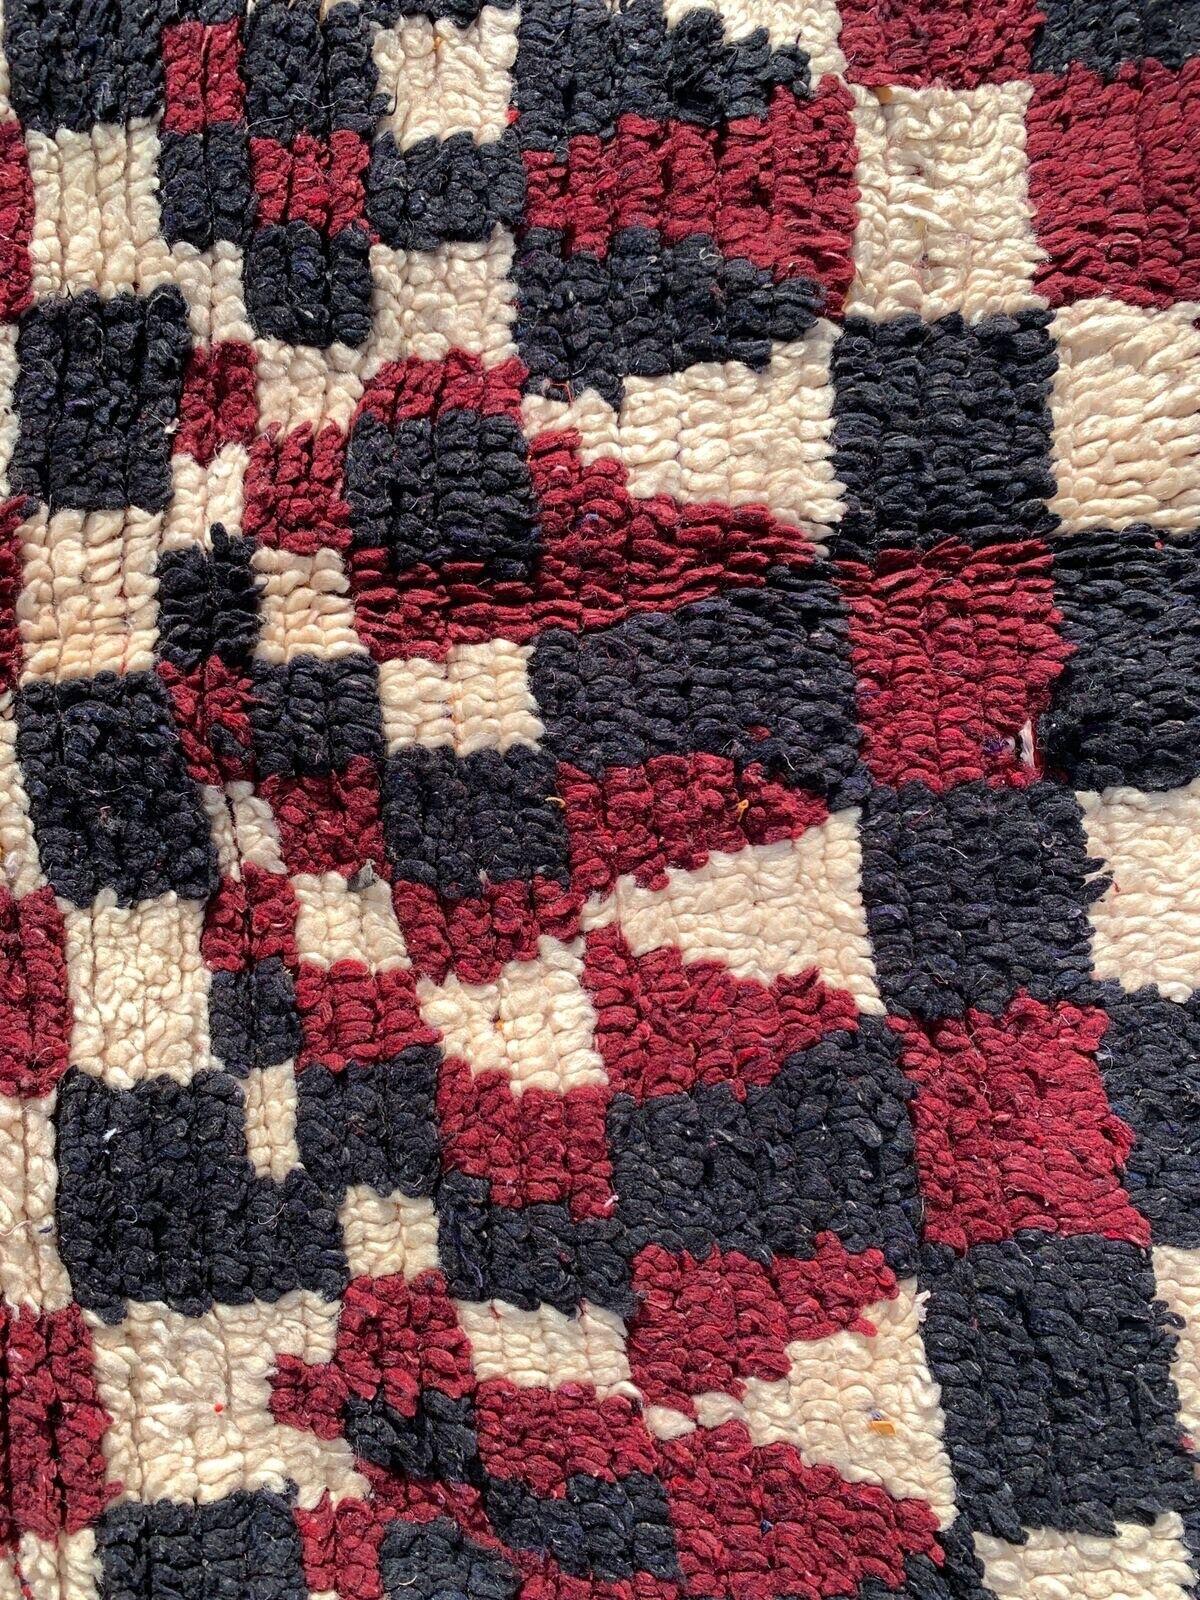 Late 20th Century Handmade Vintage Moroccan Berber Red Rug 4.1' x 8.3', 1990s - 1G08 For Sale